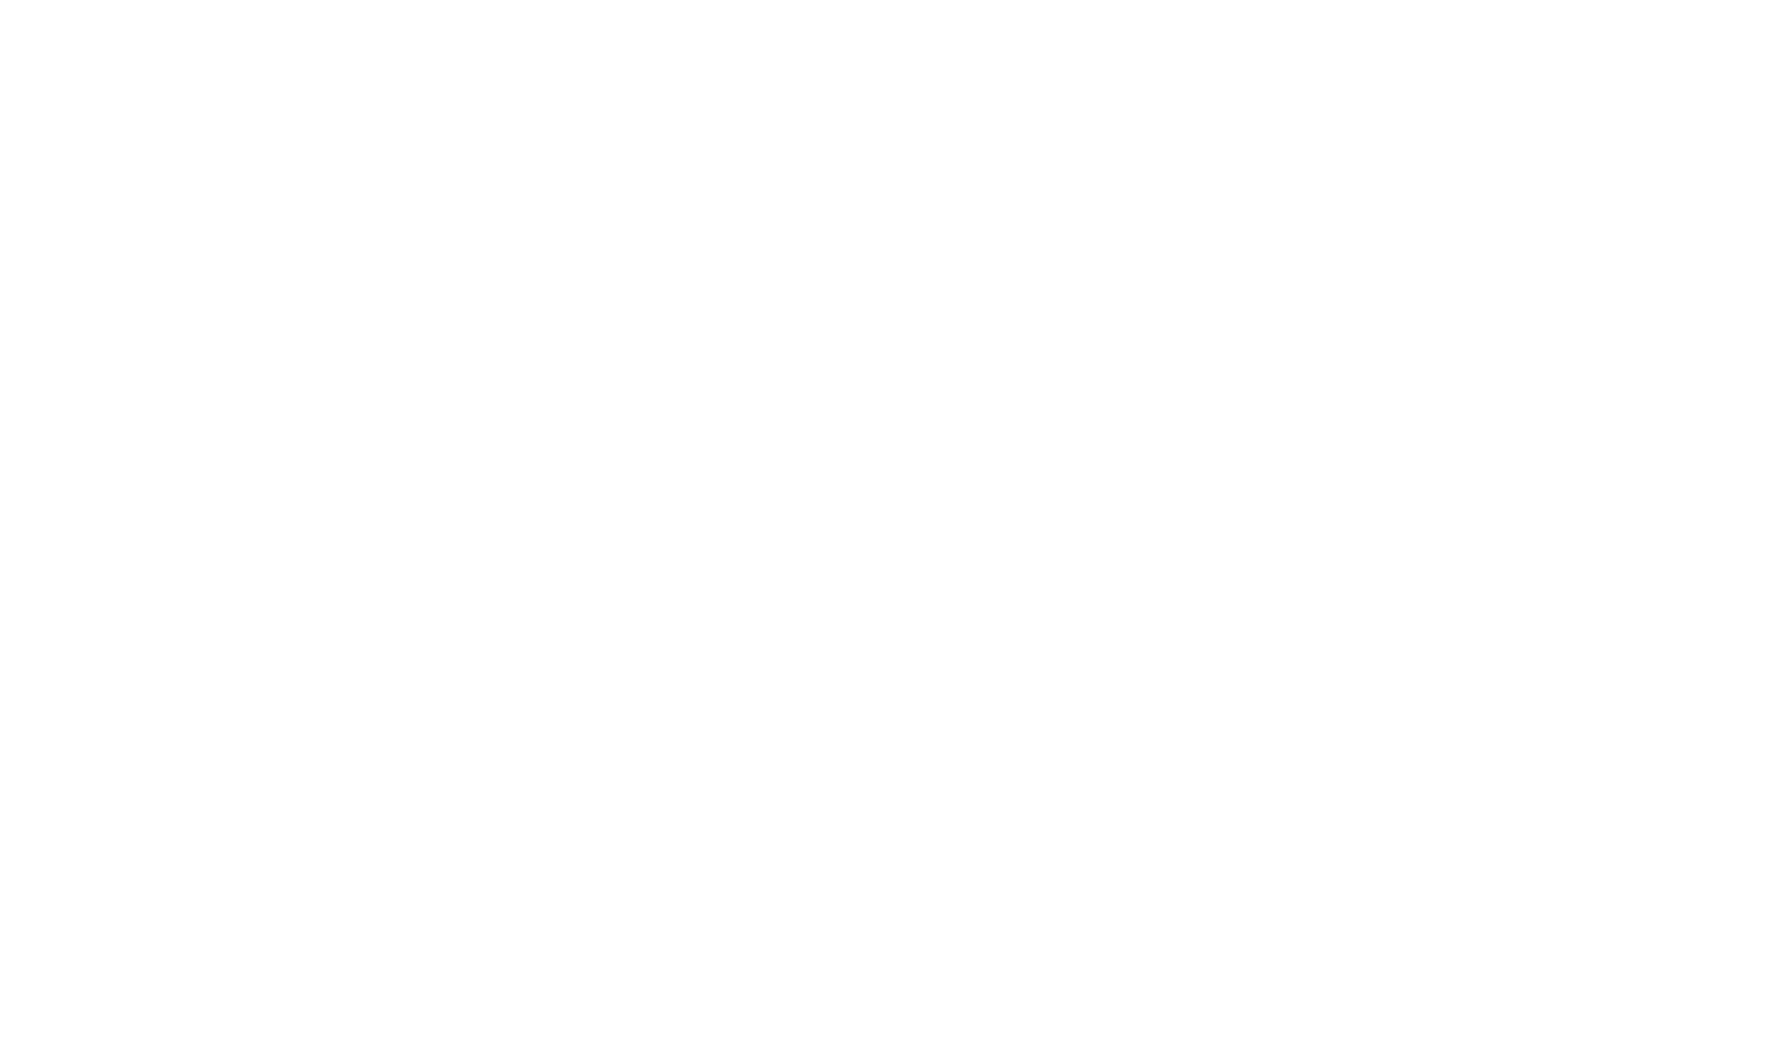 VICTORY VISION CARE